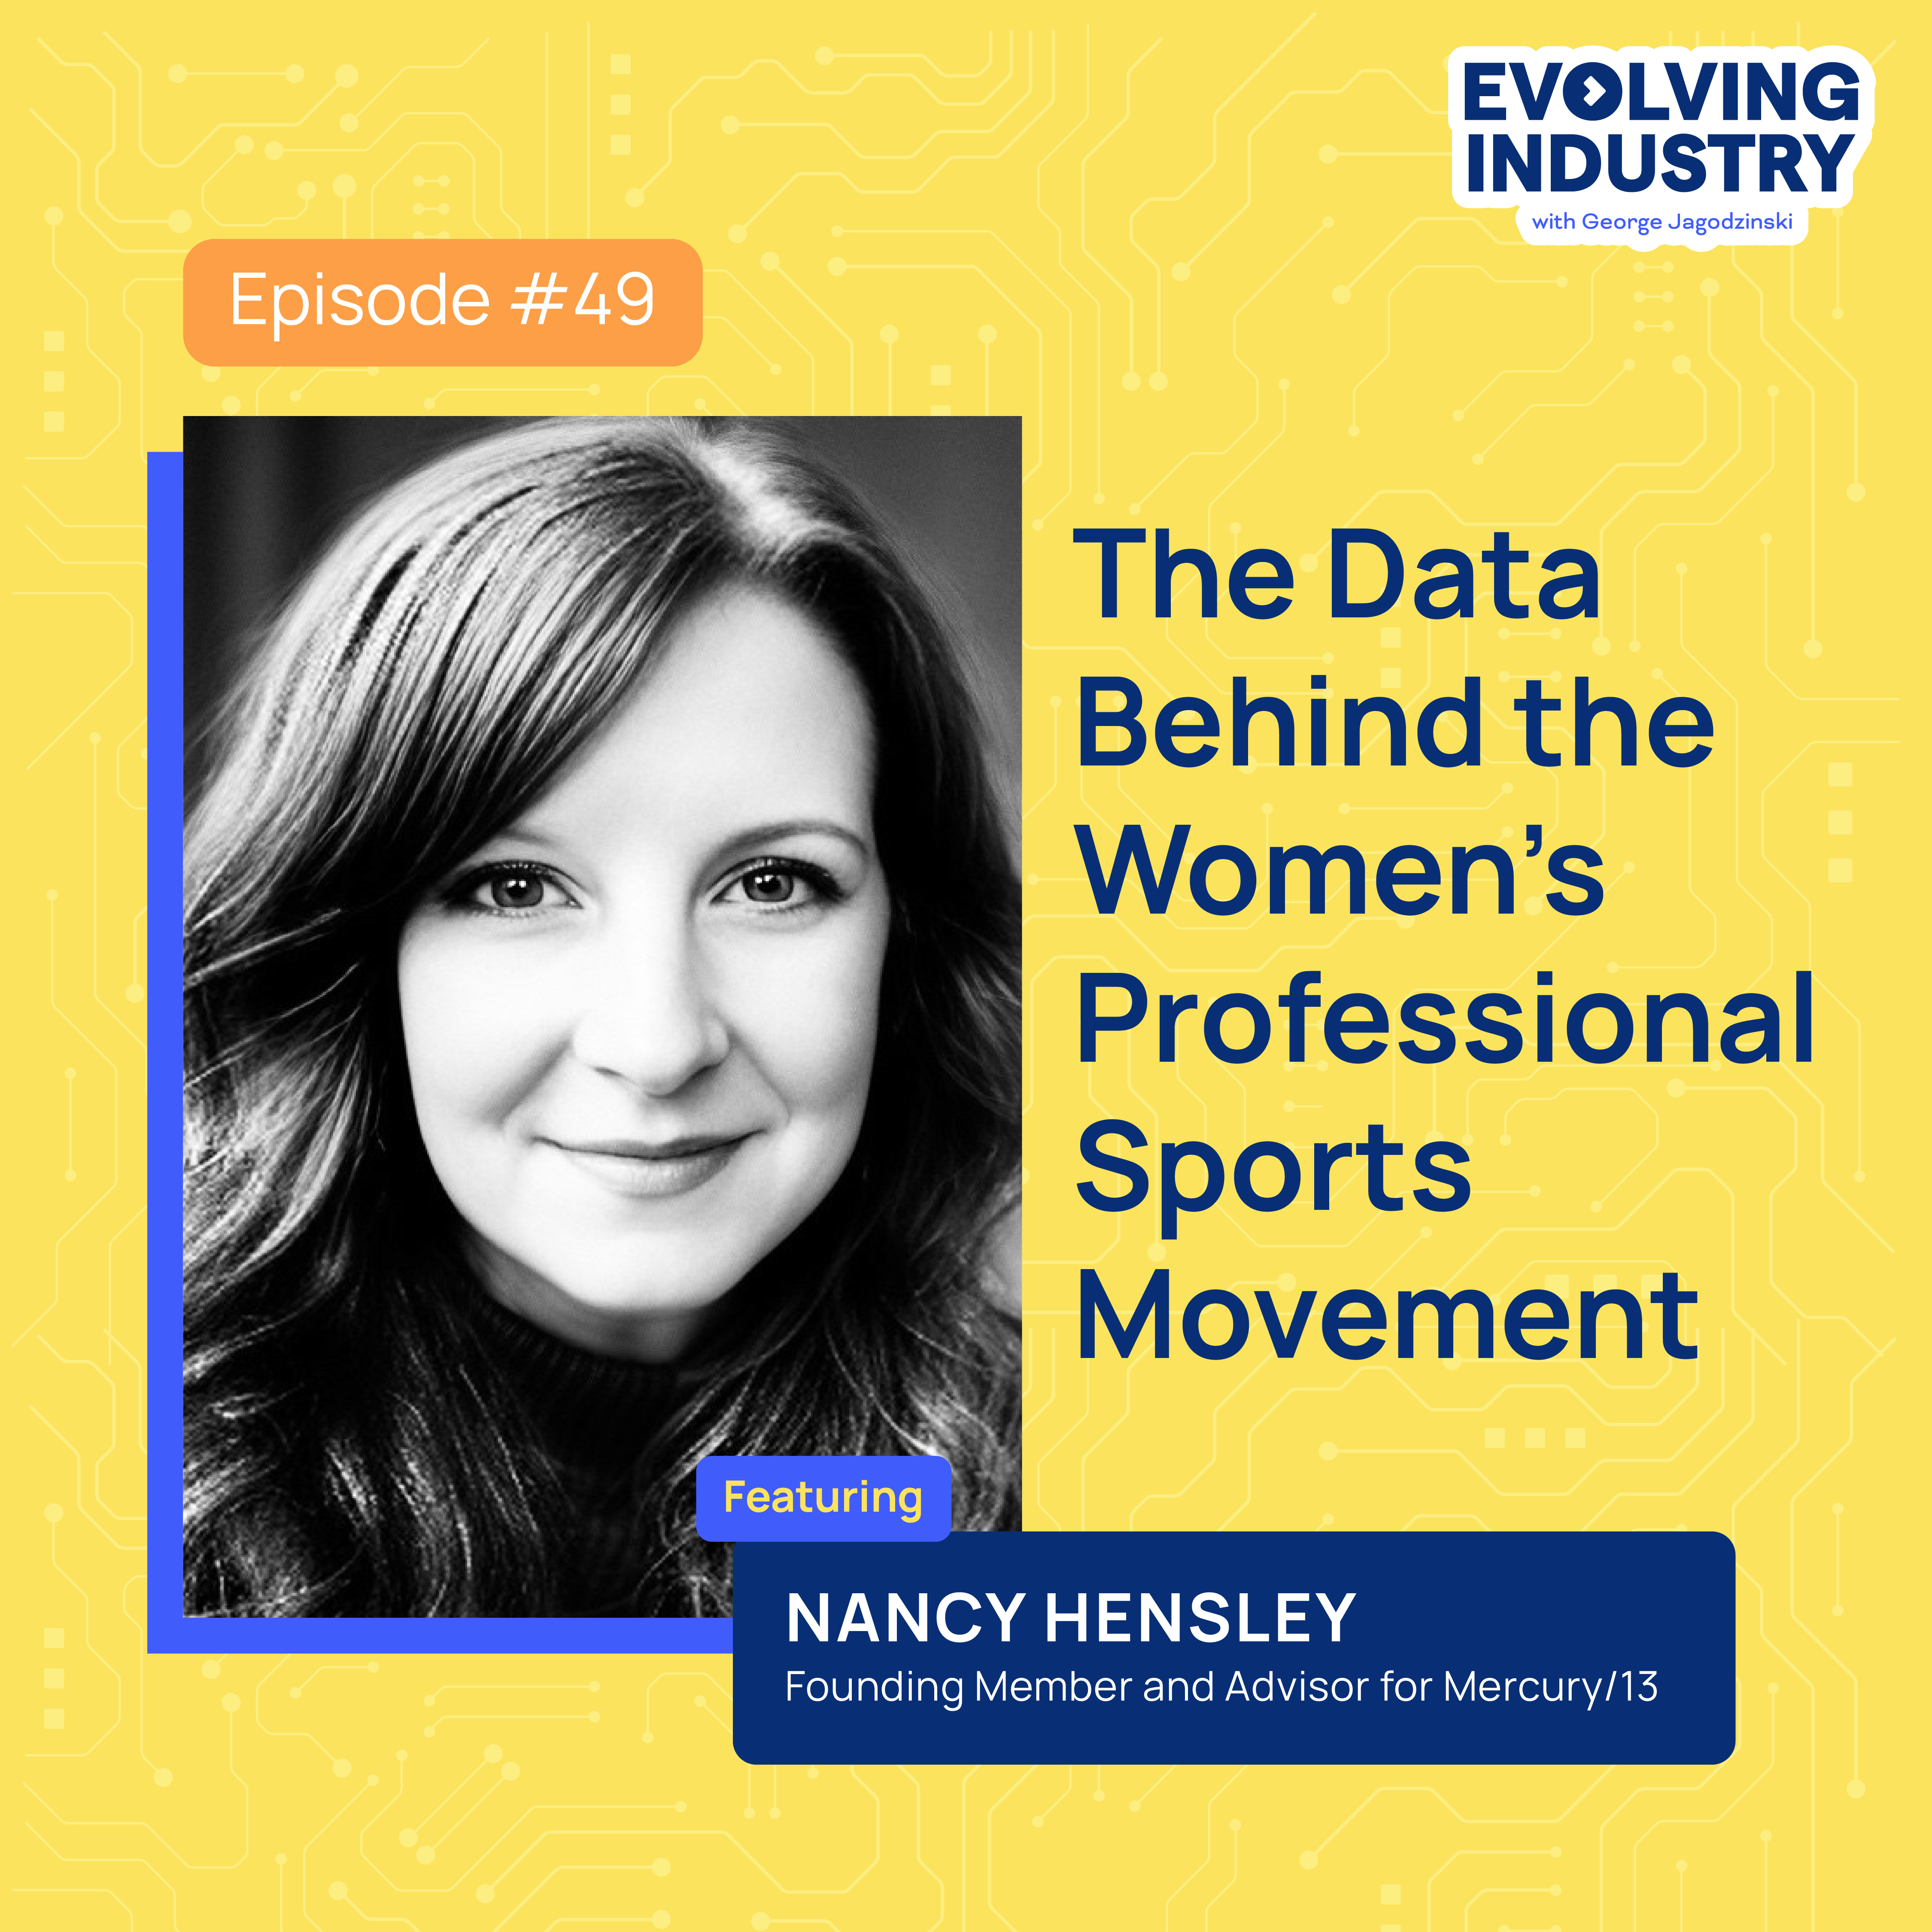 The Data Behind the Women’s Professional Sports Movement